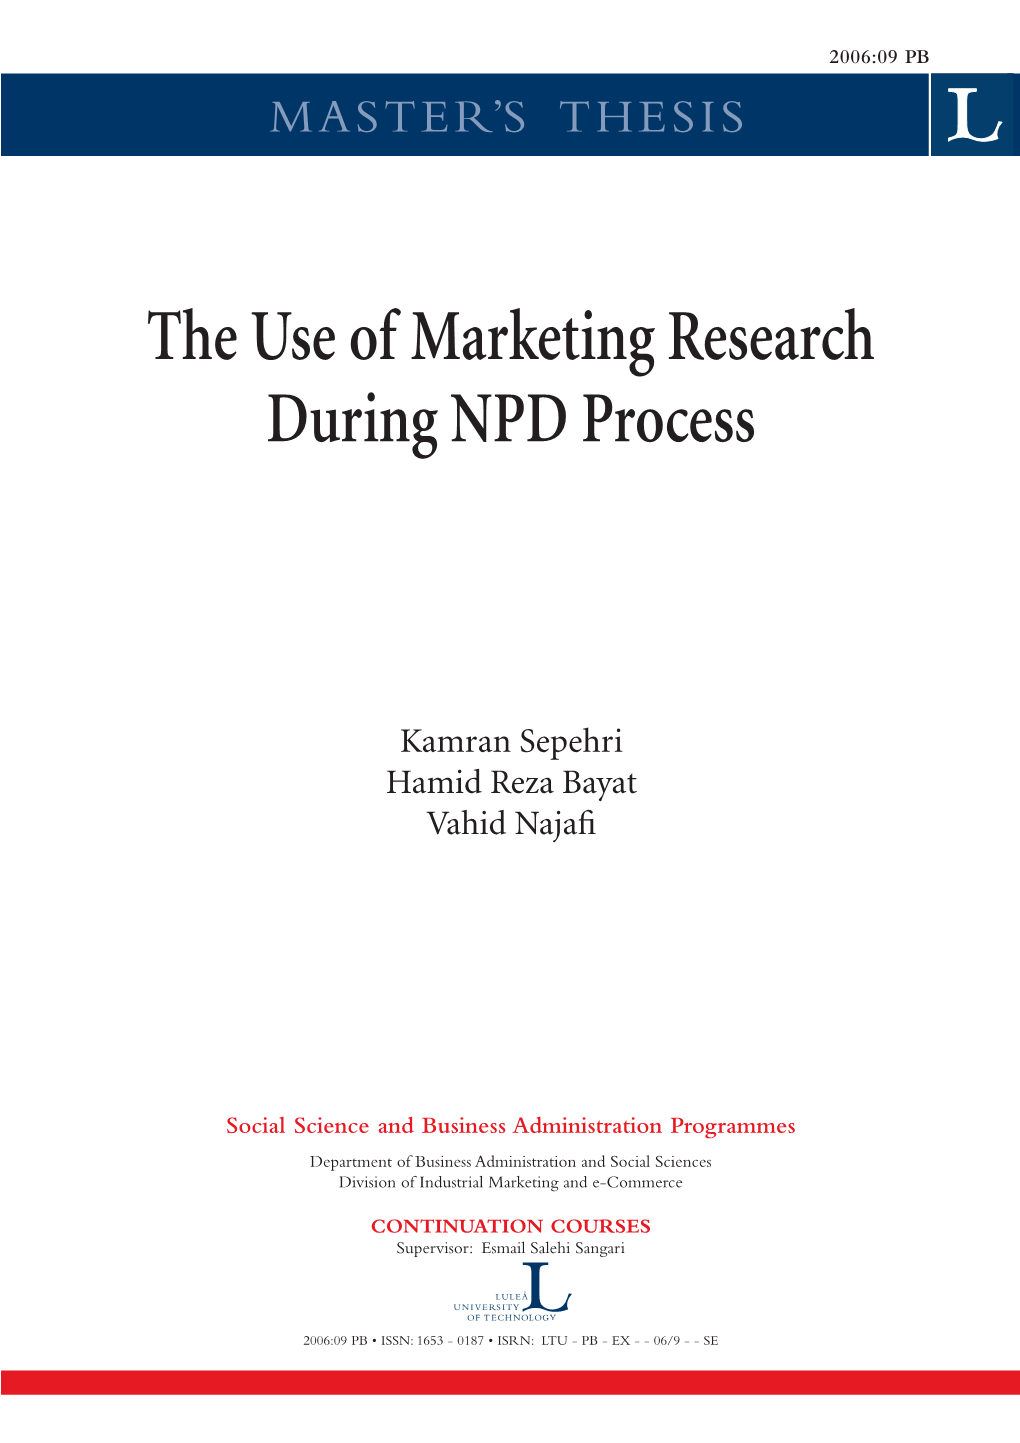 The Use of Marketing Research During NPD Process